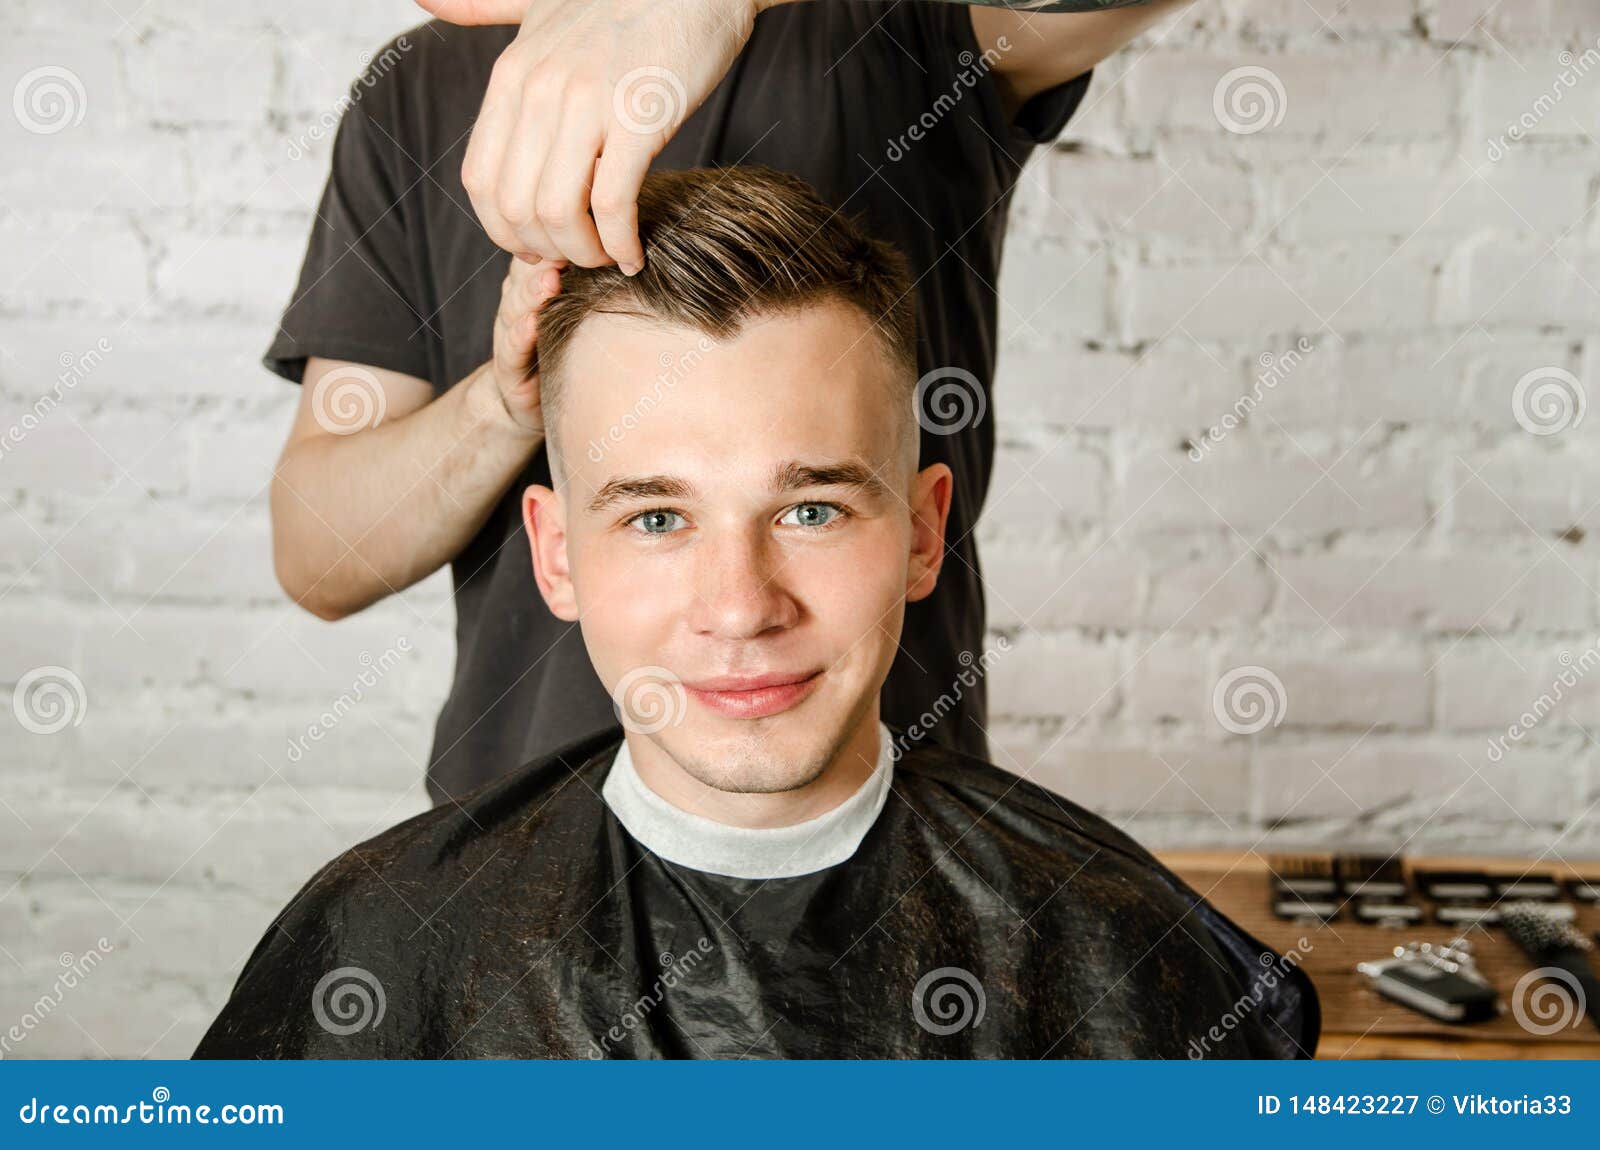 Barber Hand In Gloves Cut Hair And Hair Styling Young Man On A Brick